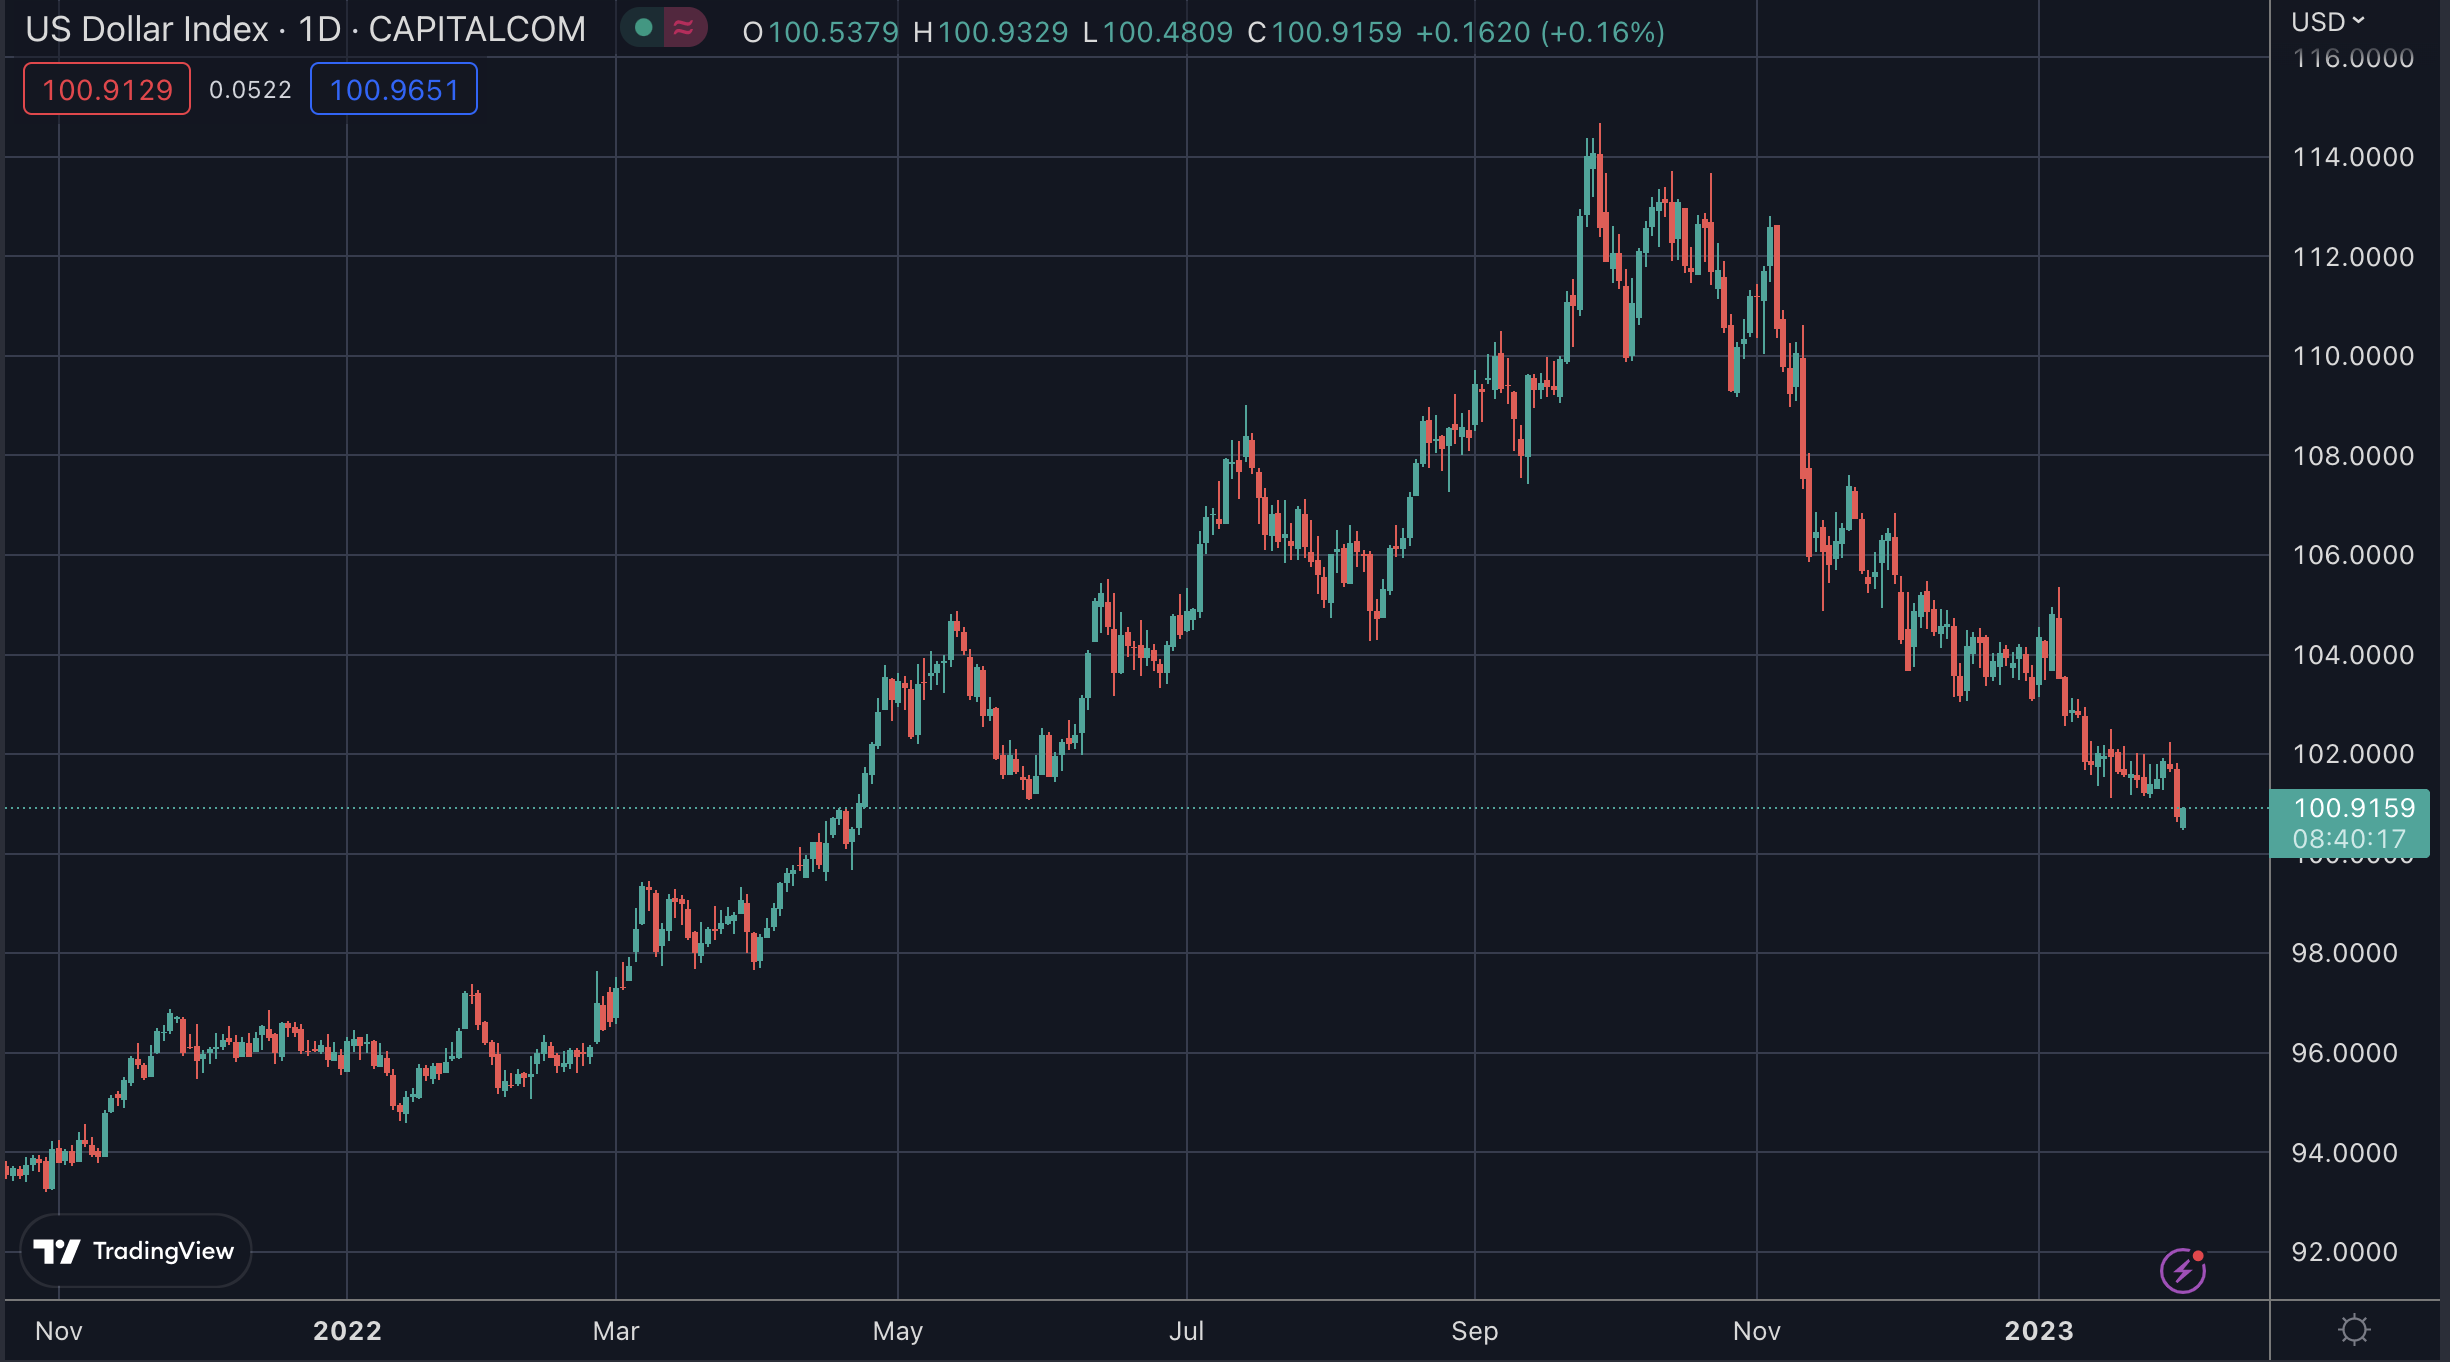 The DXY index, Feb 2023